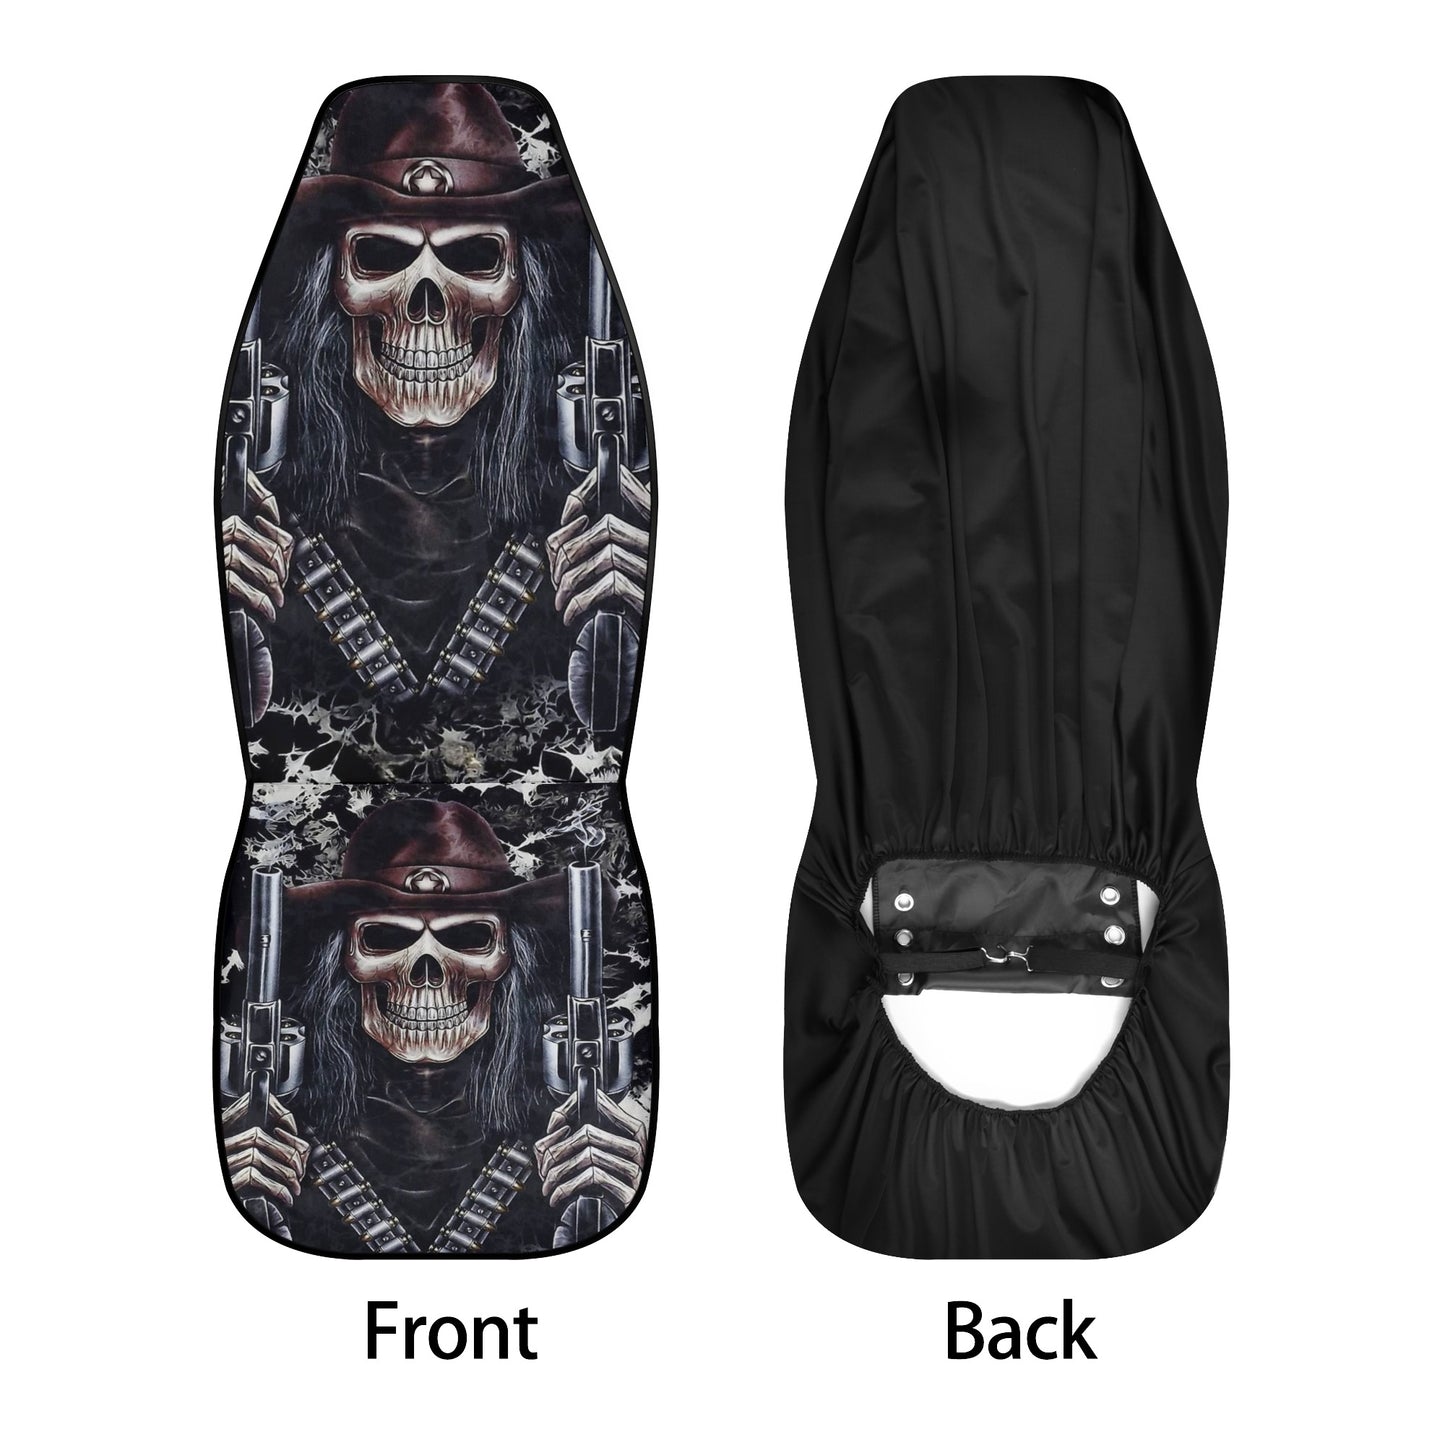 Flower skull car seat protector, floral skull seat cover for car, grim reaper seat cover for truck, skull car seat cover full set, goth floo